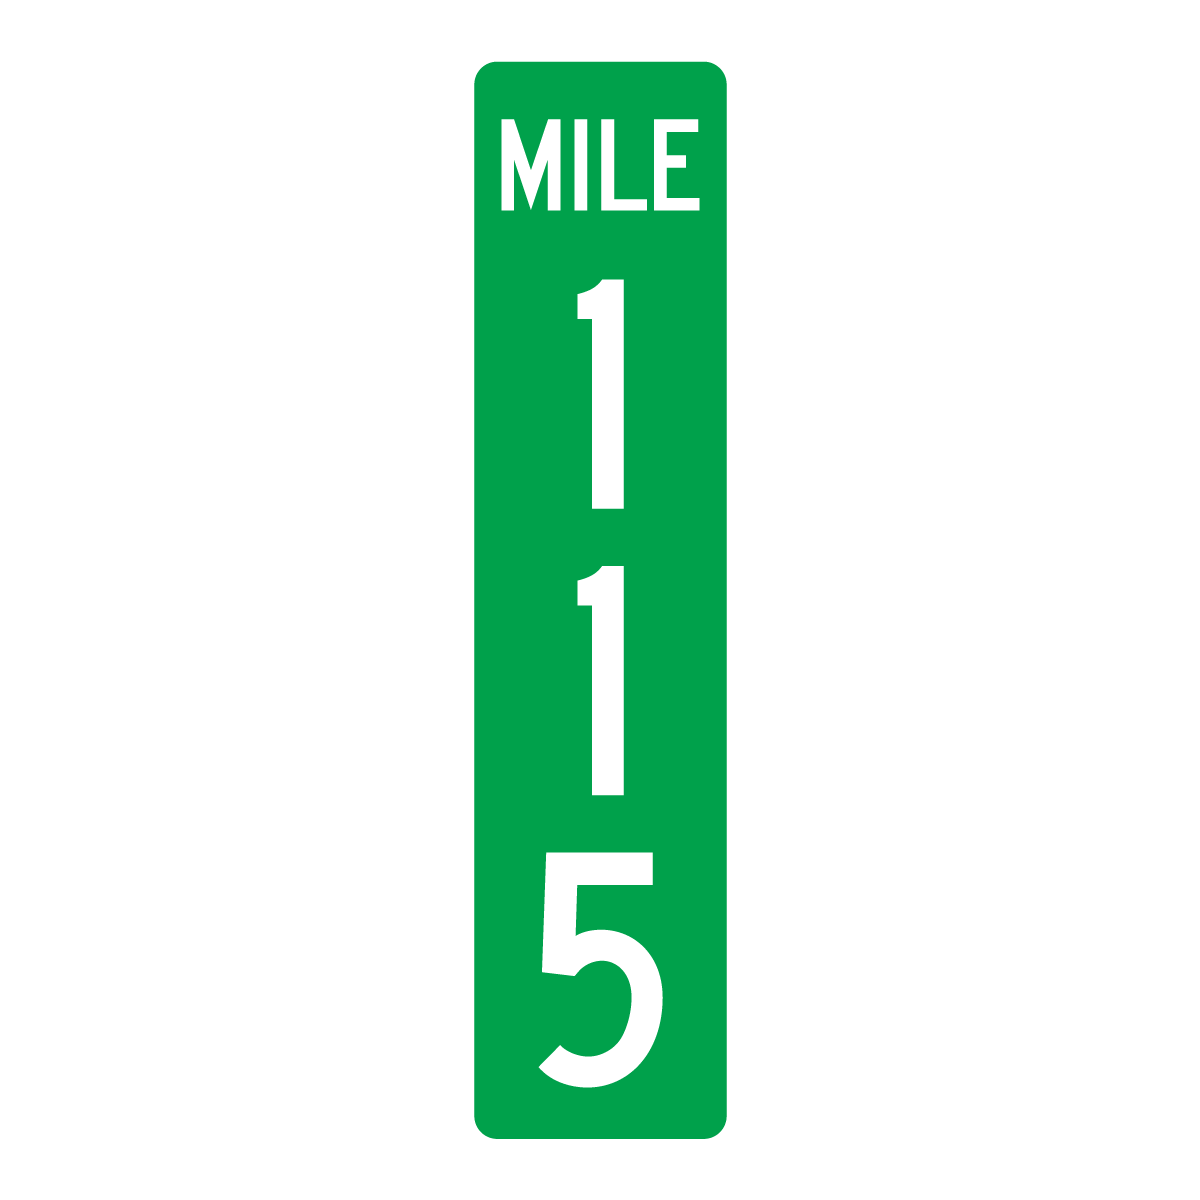 D10-3 Reference Location (Milepost) (3 digits)